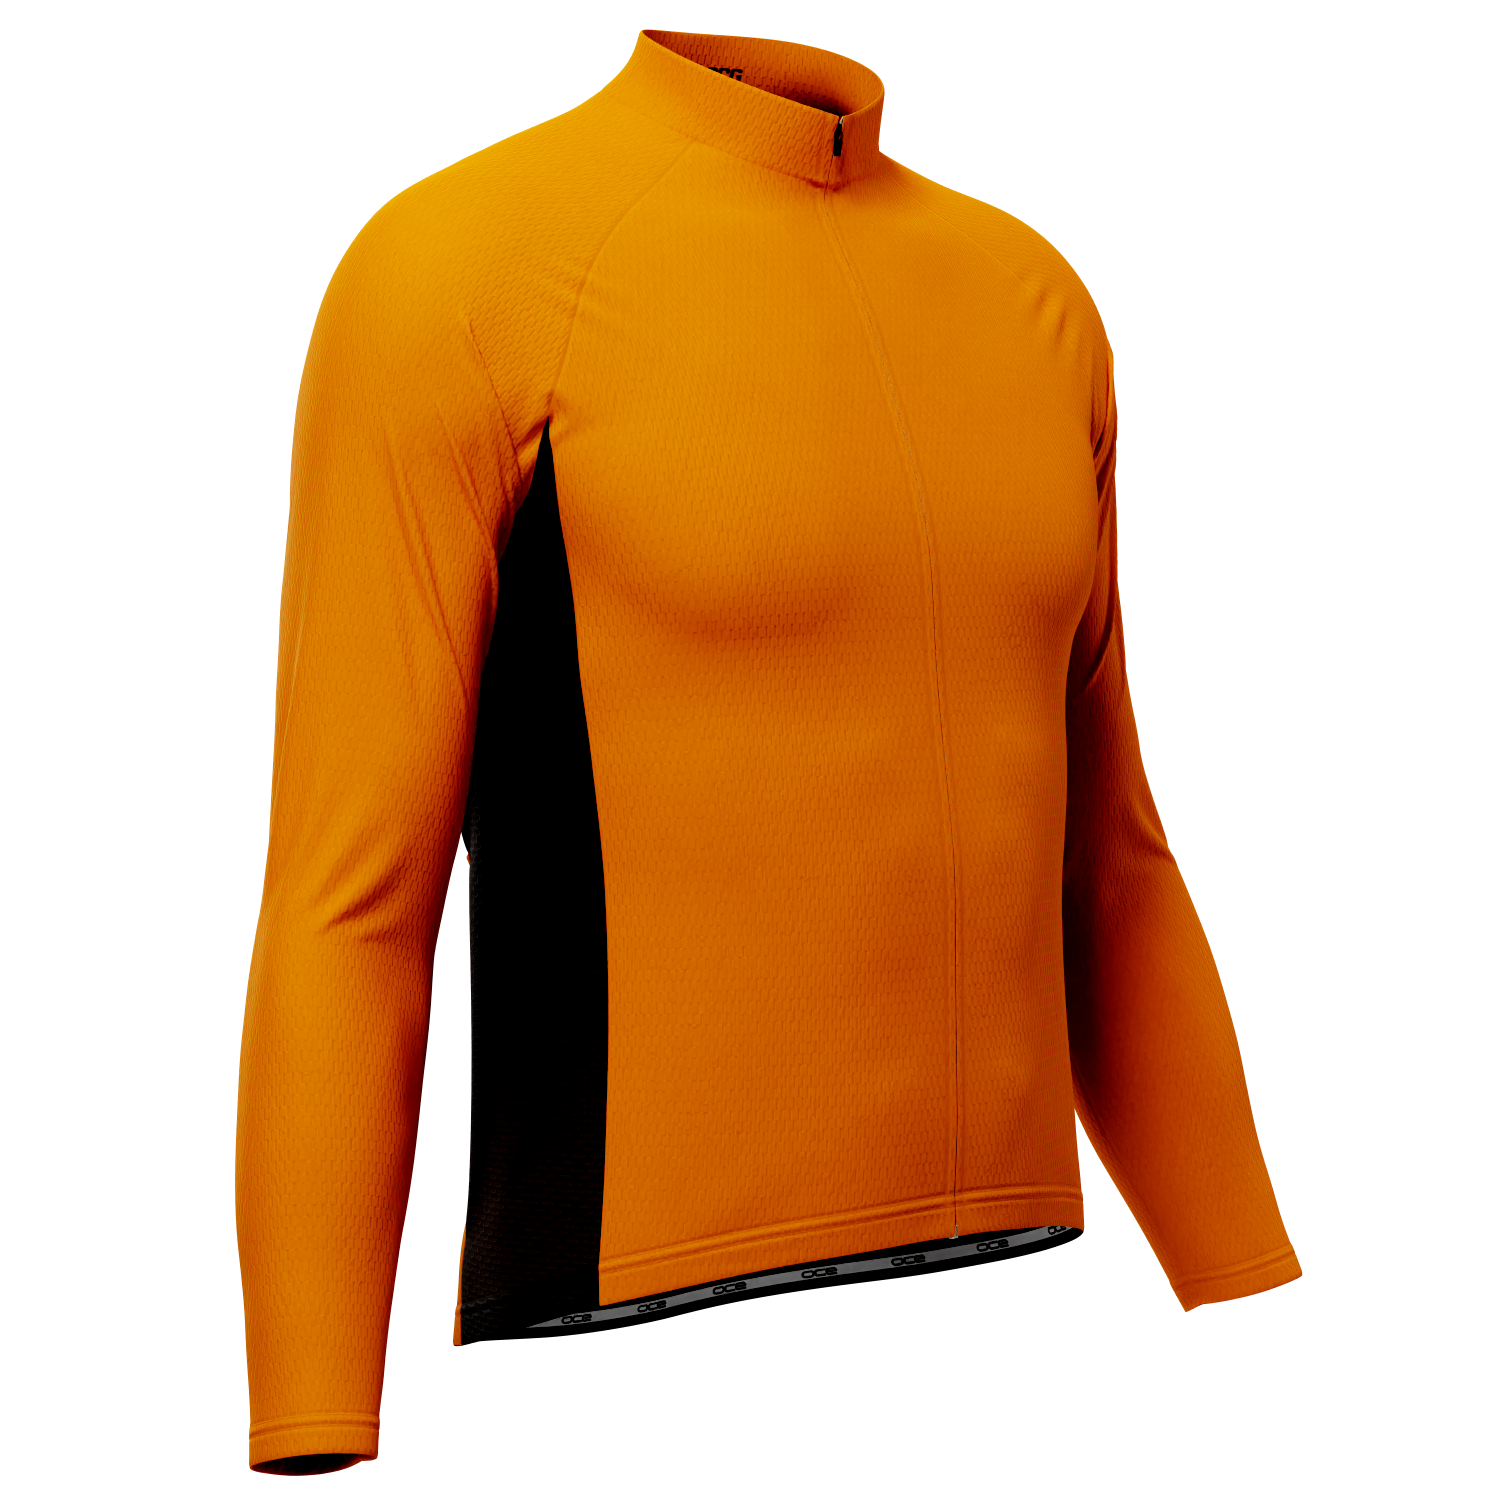 Men's Basic Colors Long Sleeve Cycling Jersey